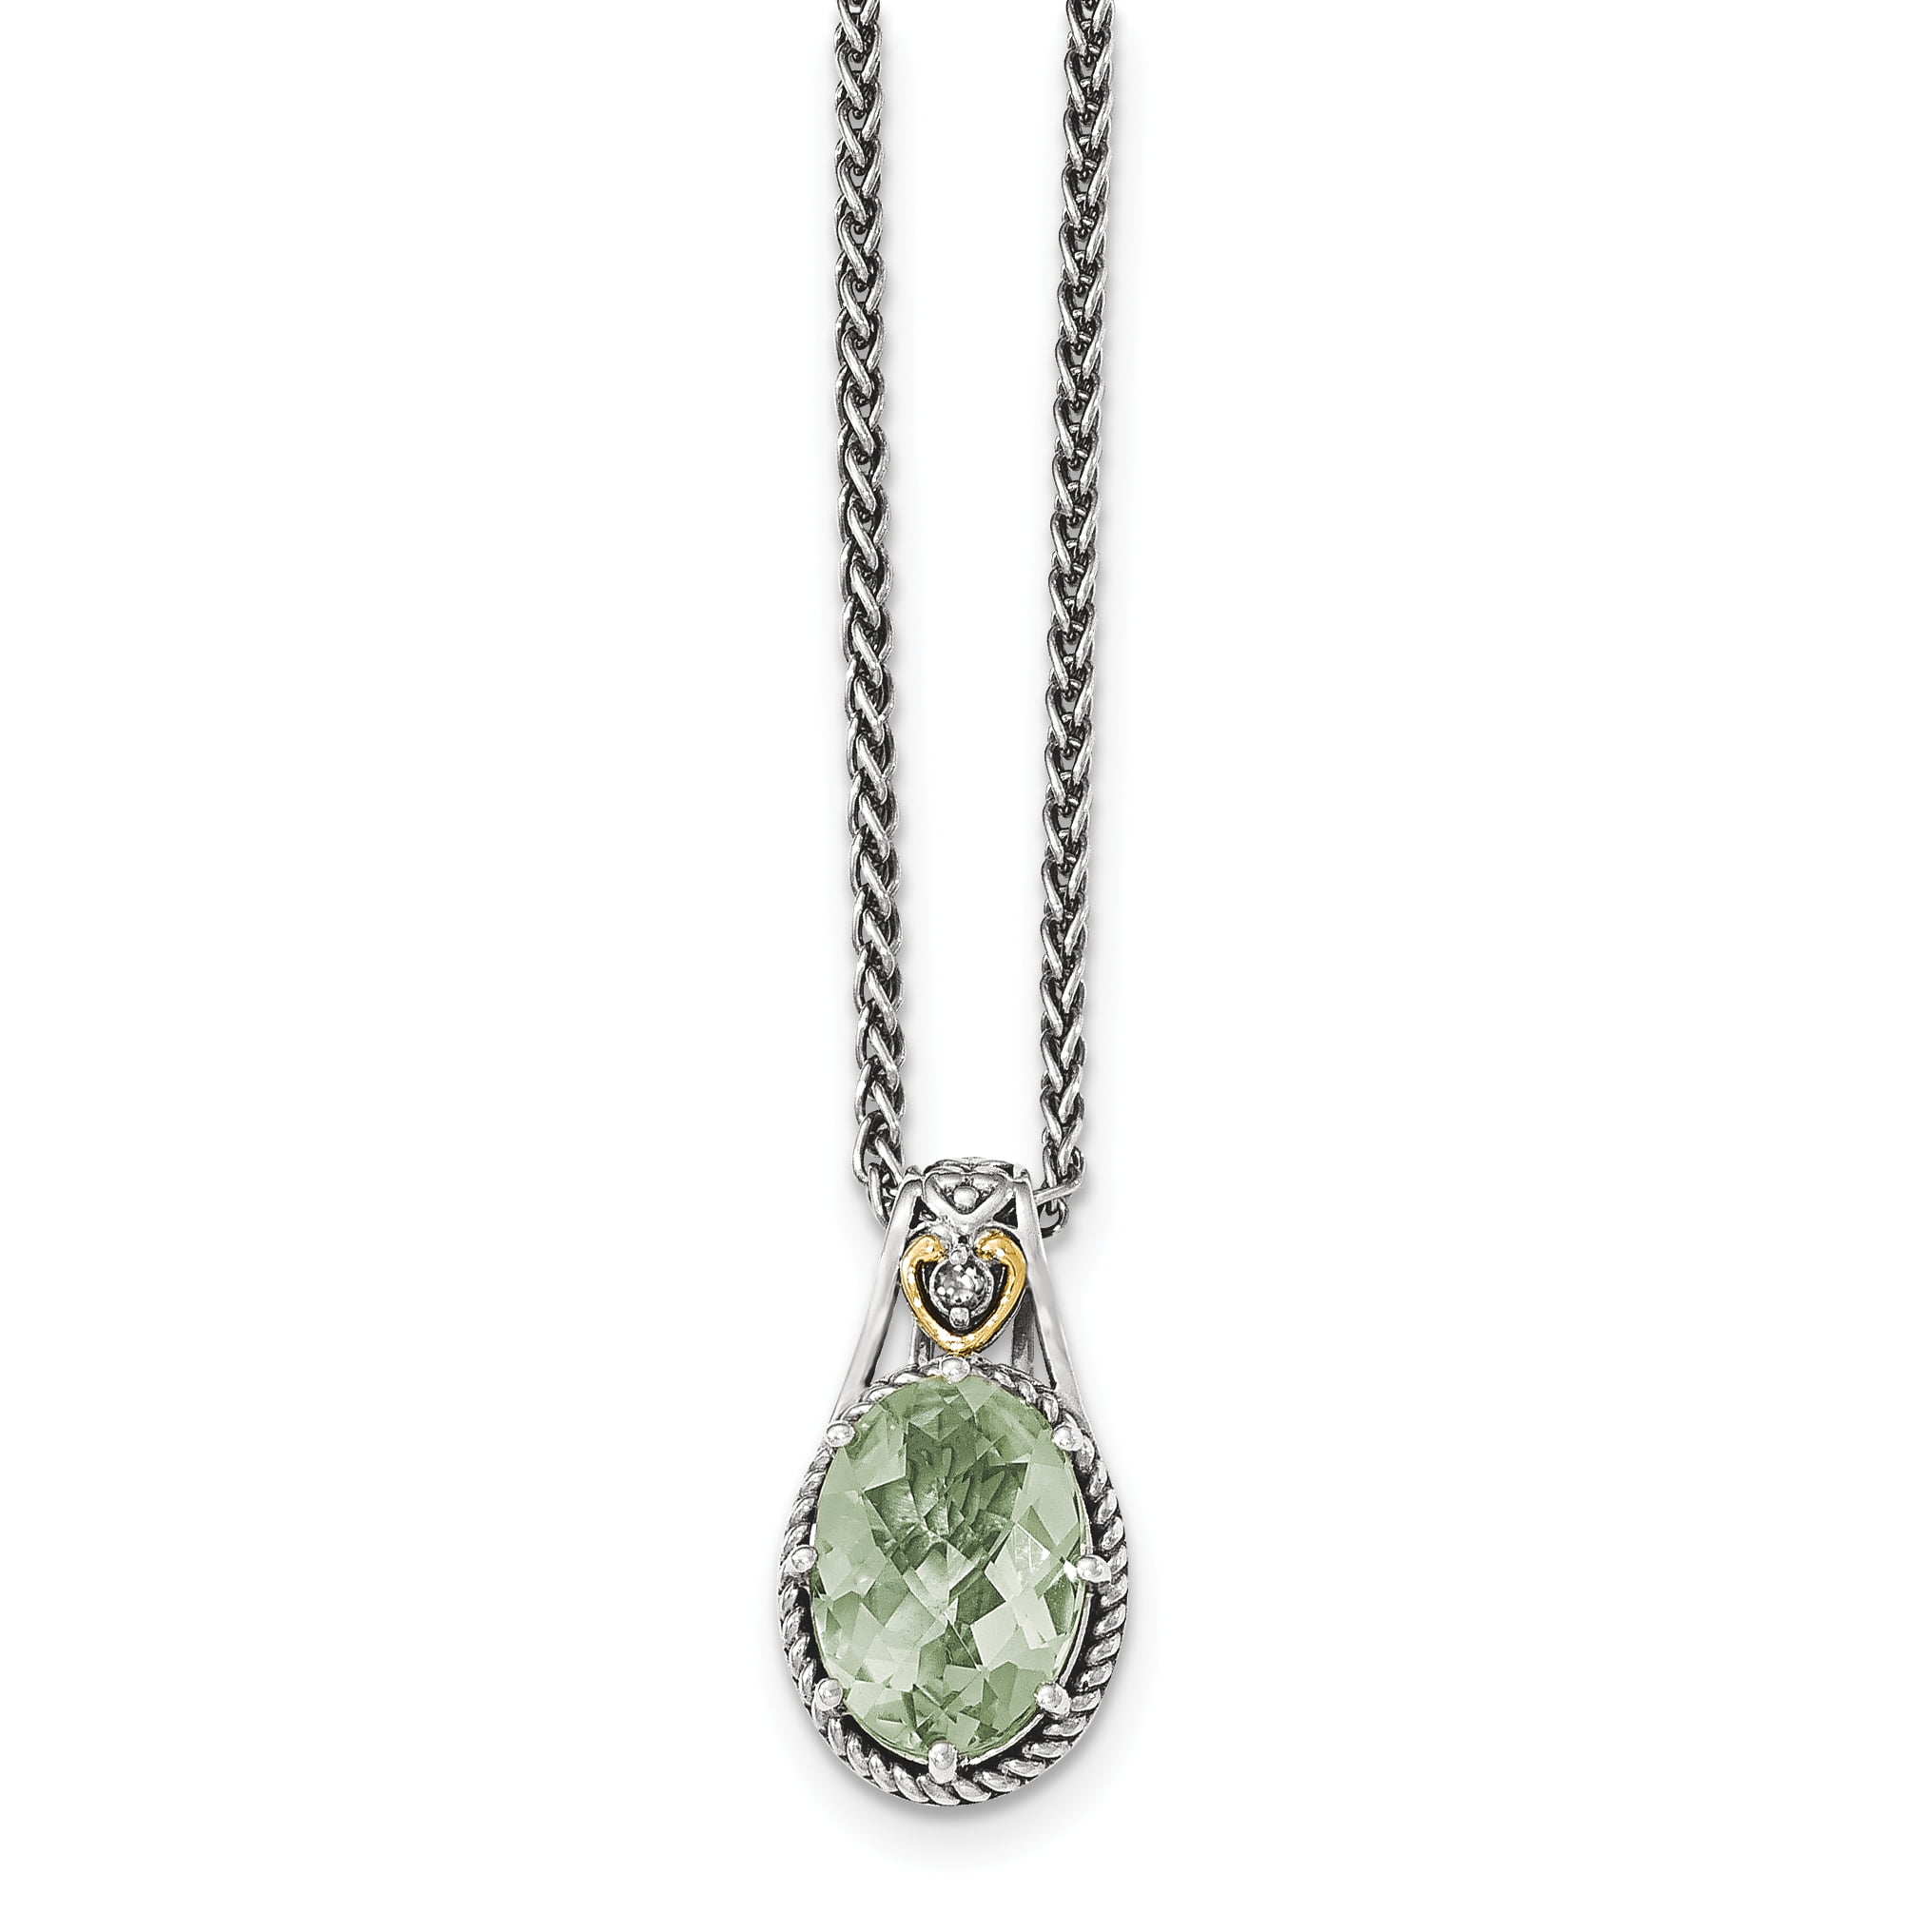 18 Shey Couture 925 Sterling Silver with Gold-Tone Accent Amethyst and Peridot Necklace